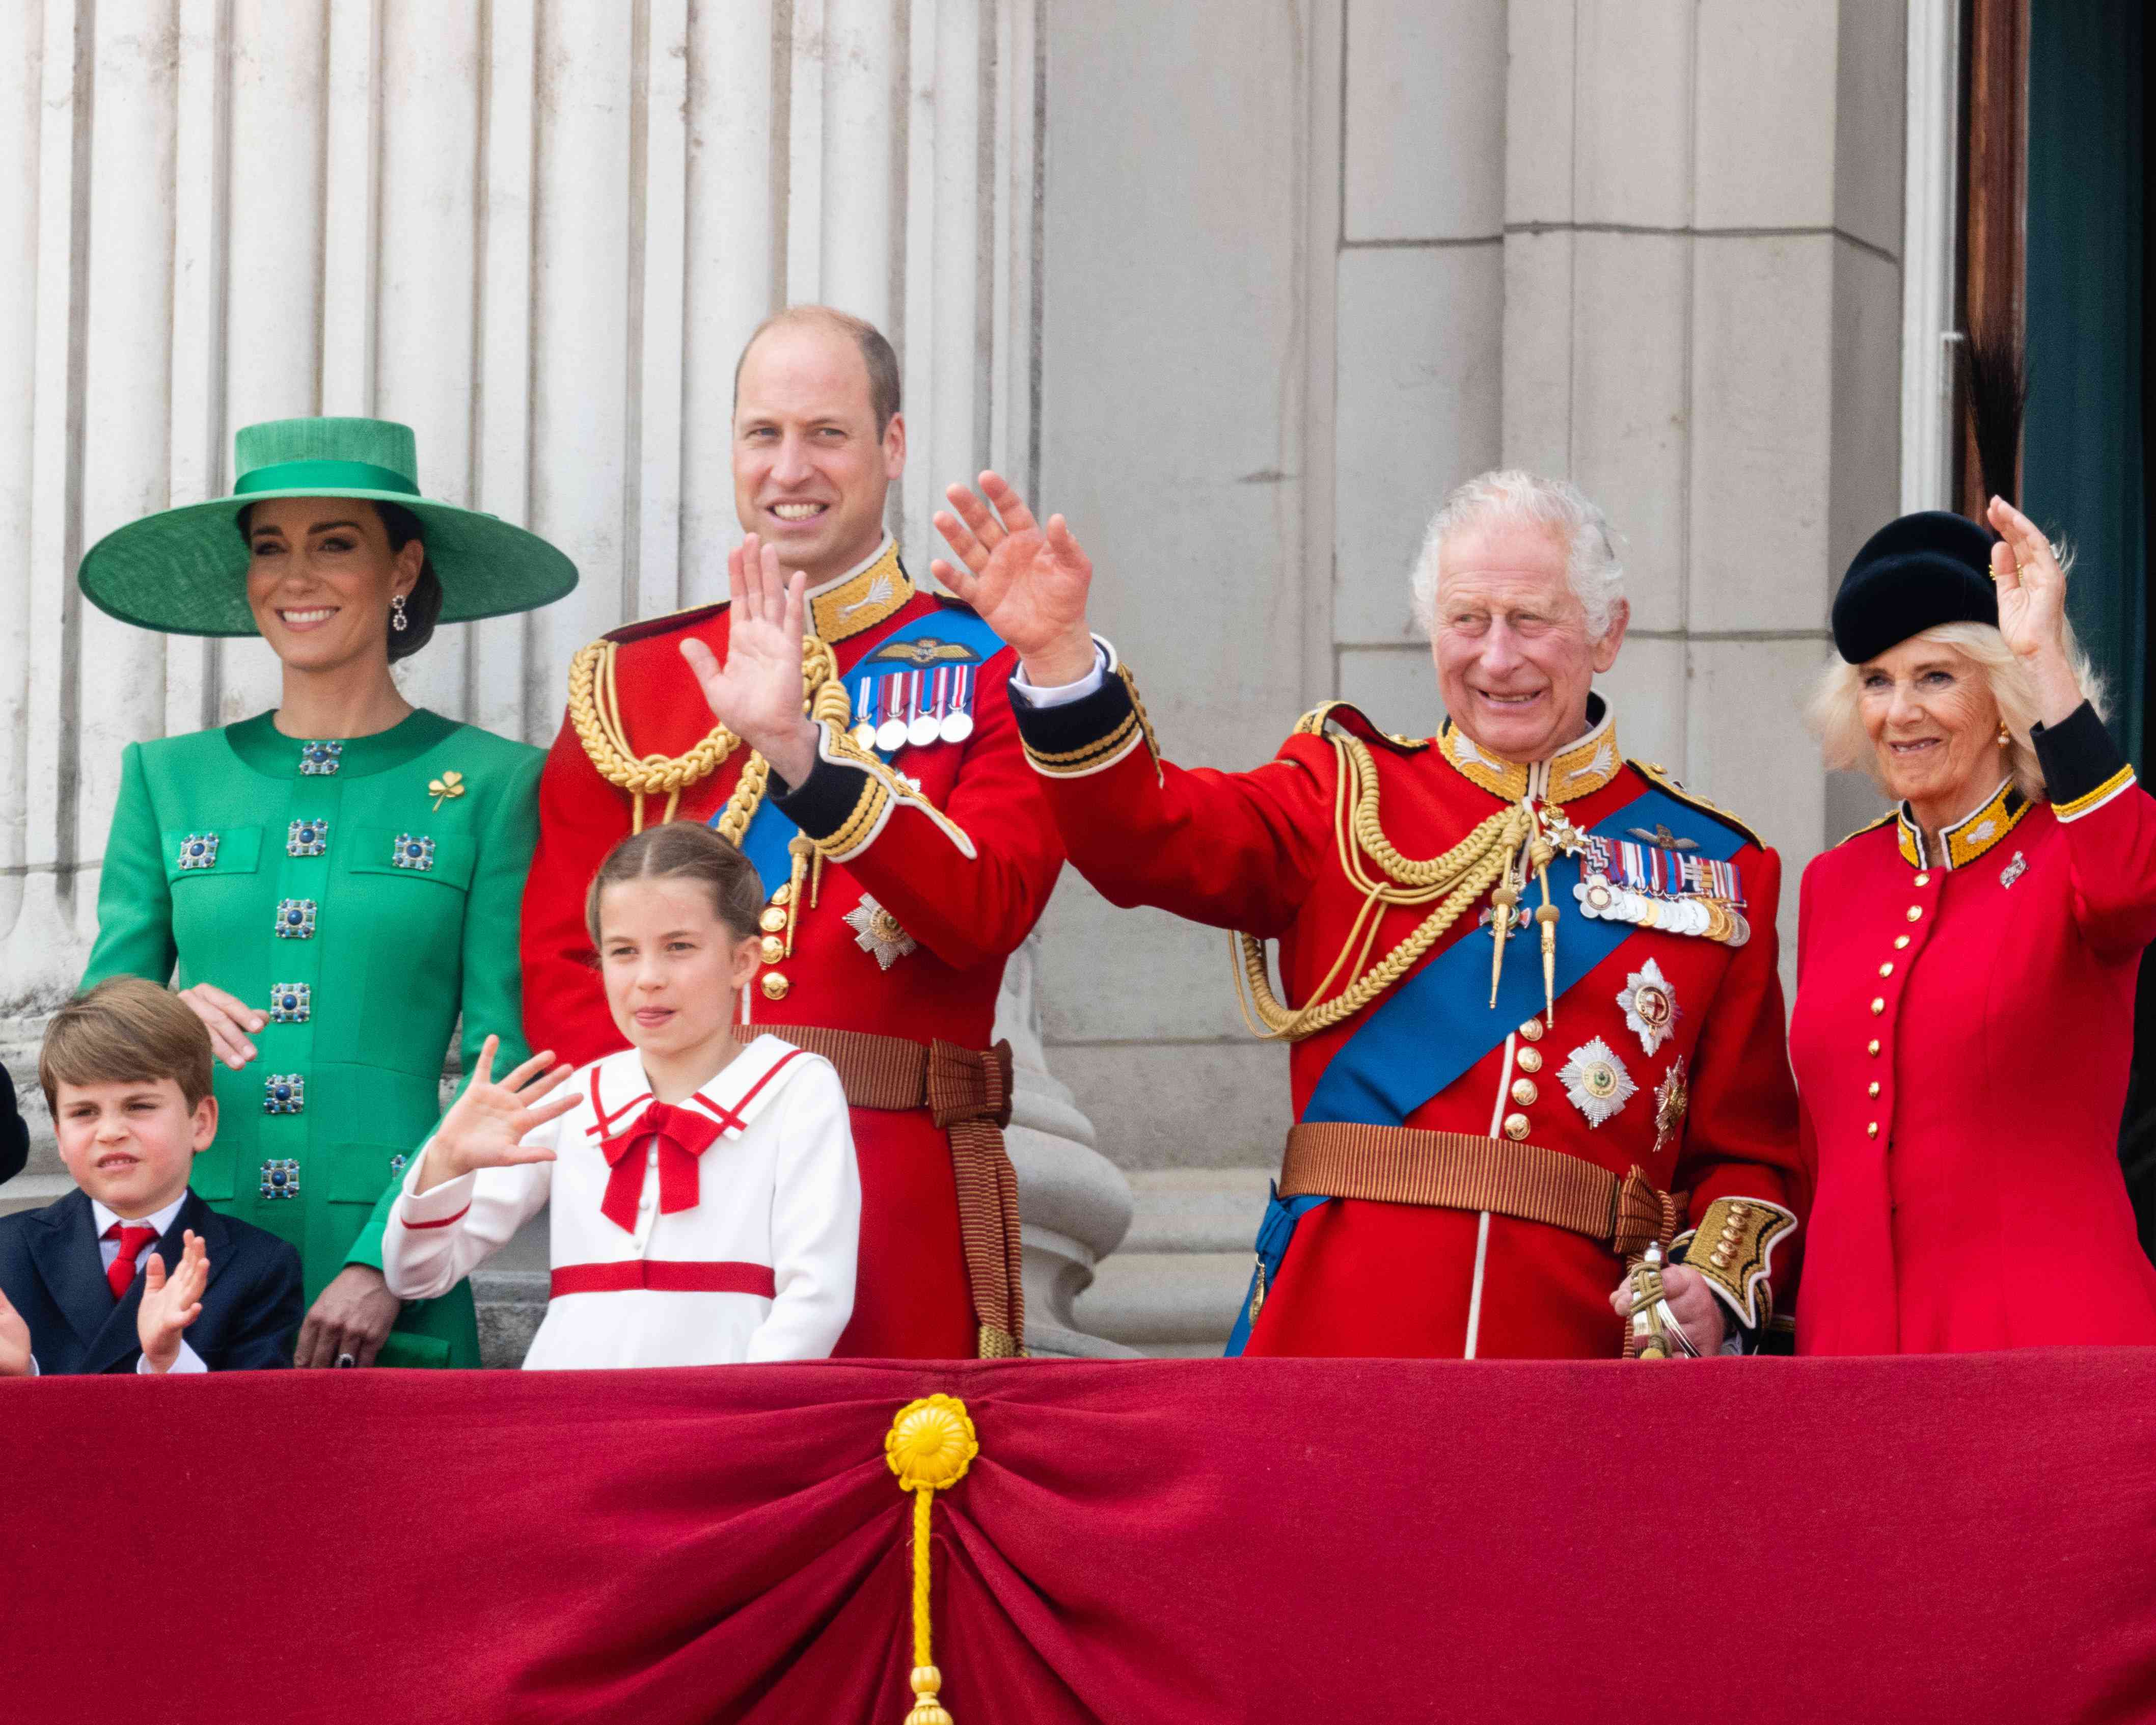 A Full Guide to the Modern British Royal Family